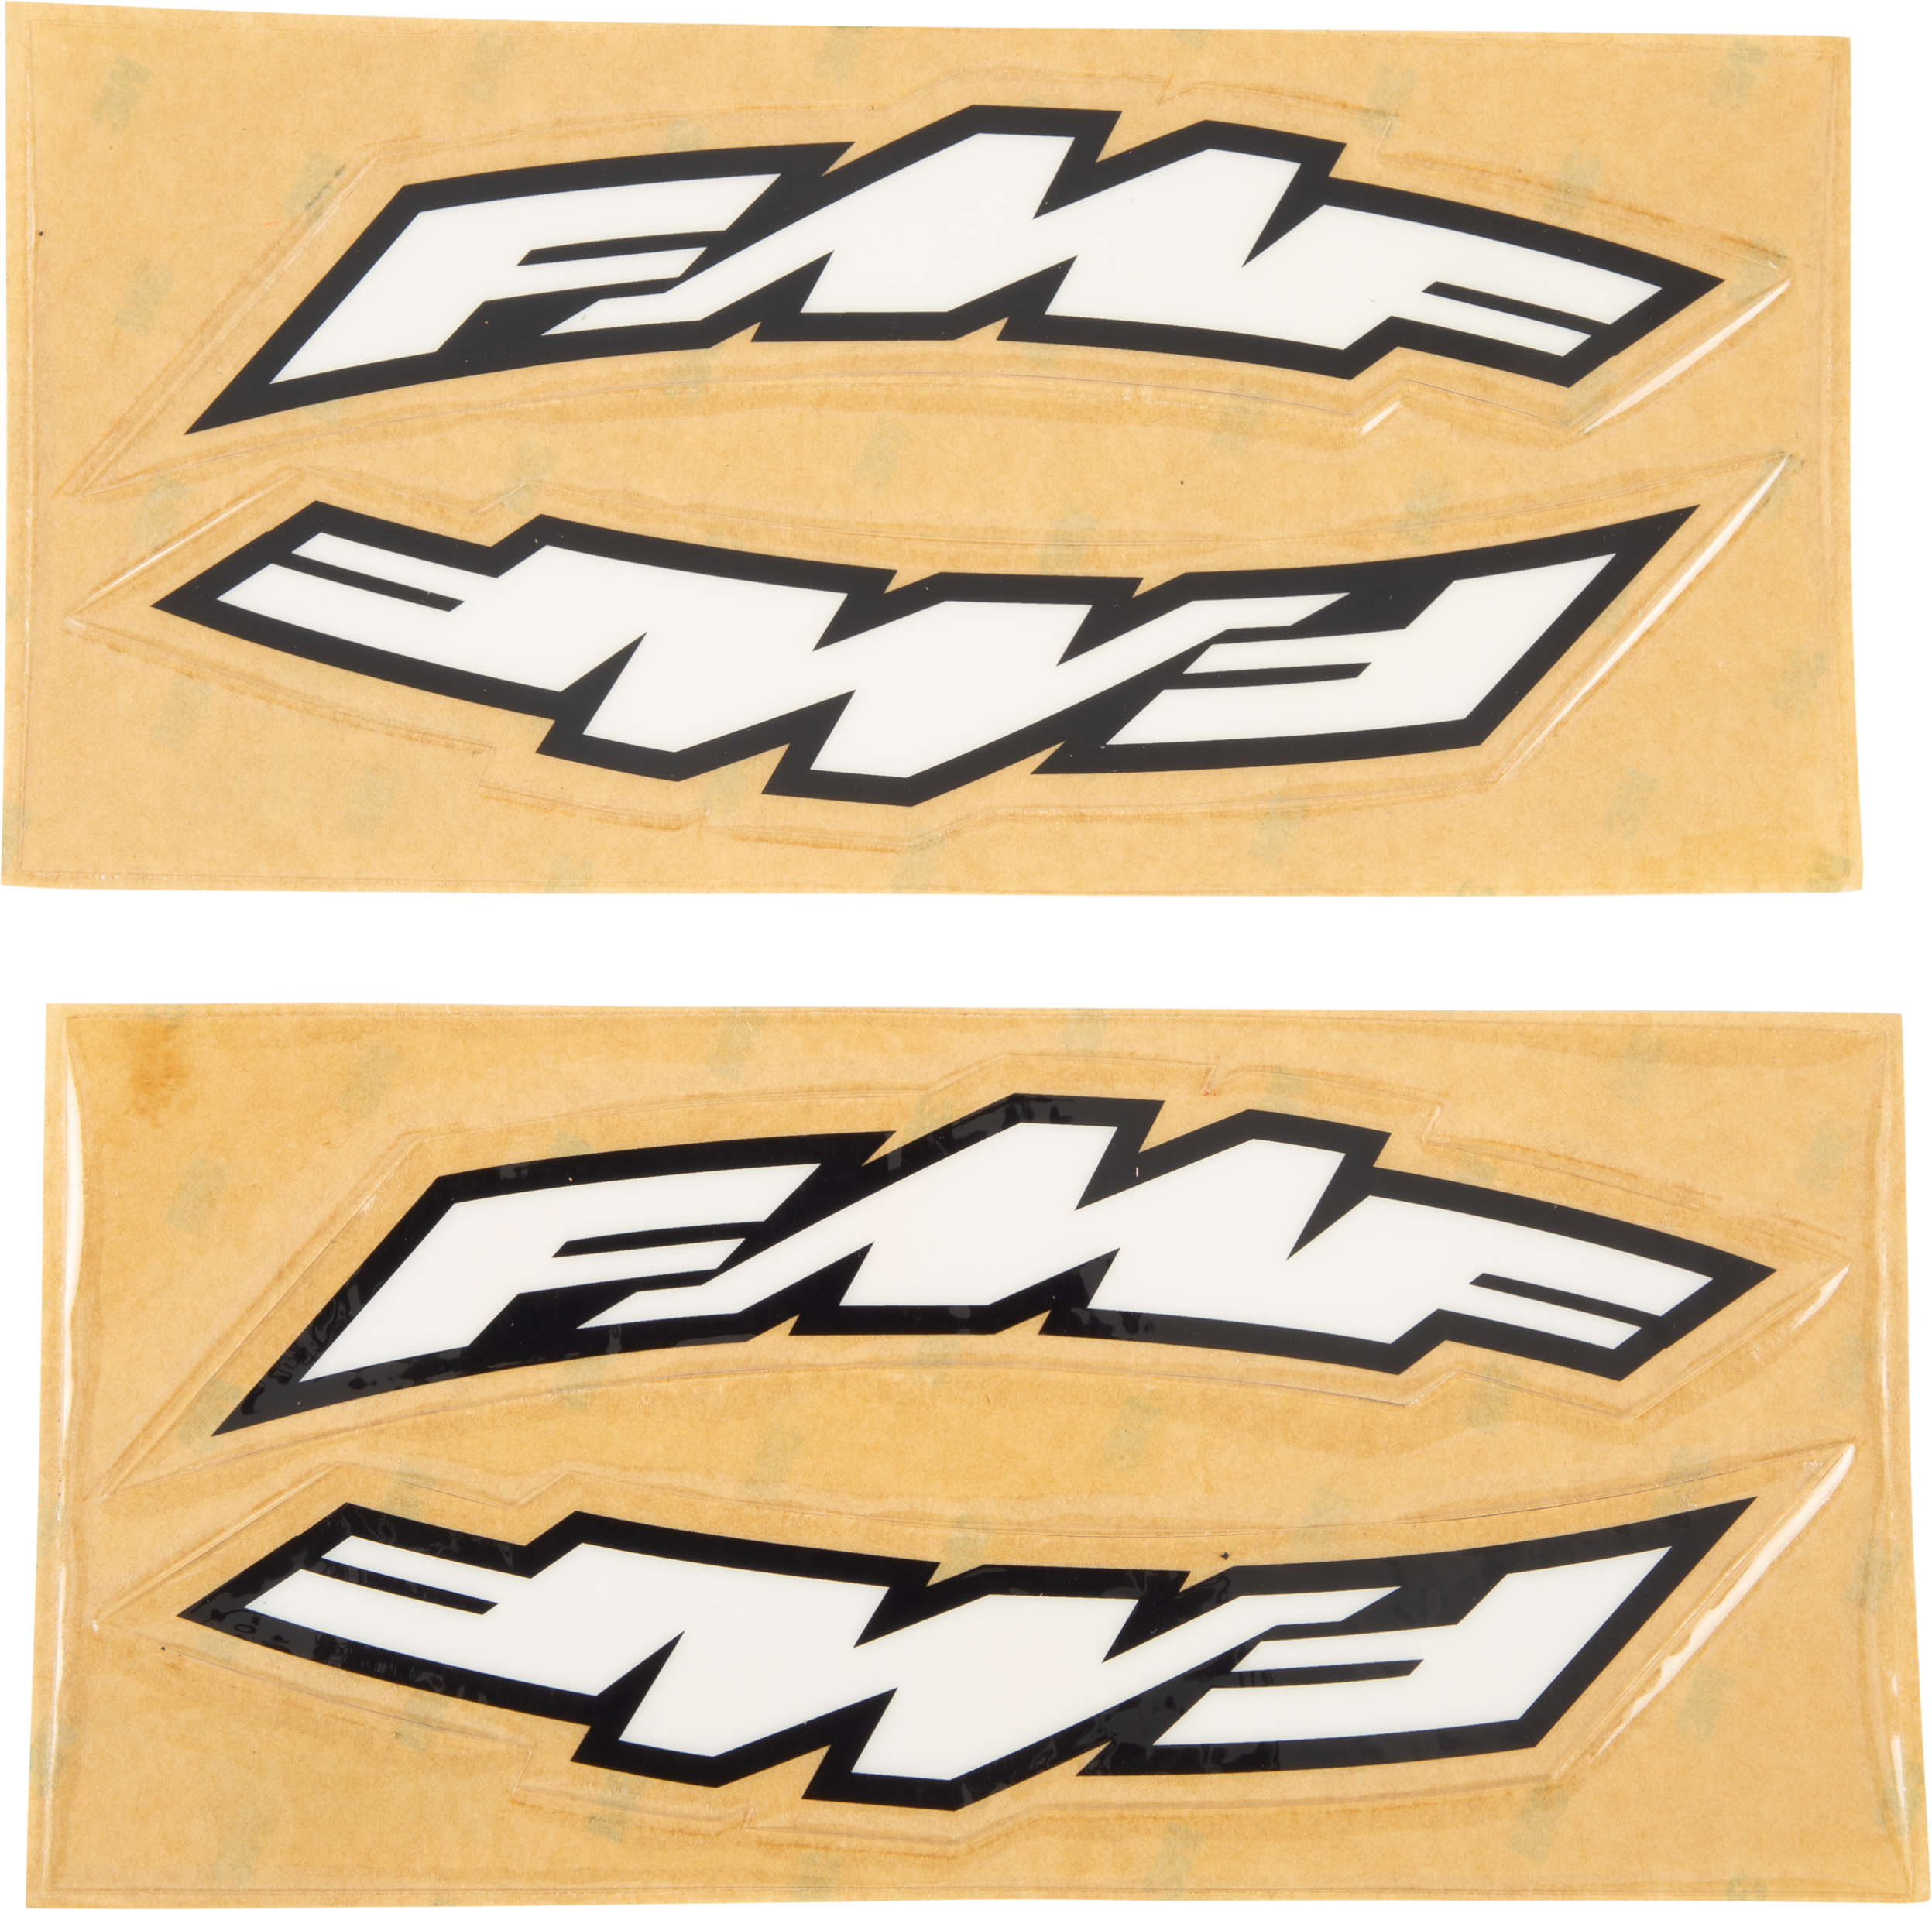 Fmf - Large Side Arch Fender Stickers 2/pk - 15231